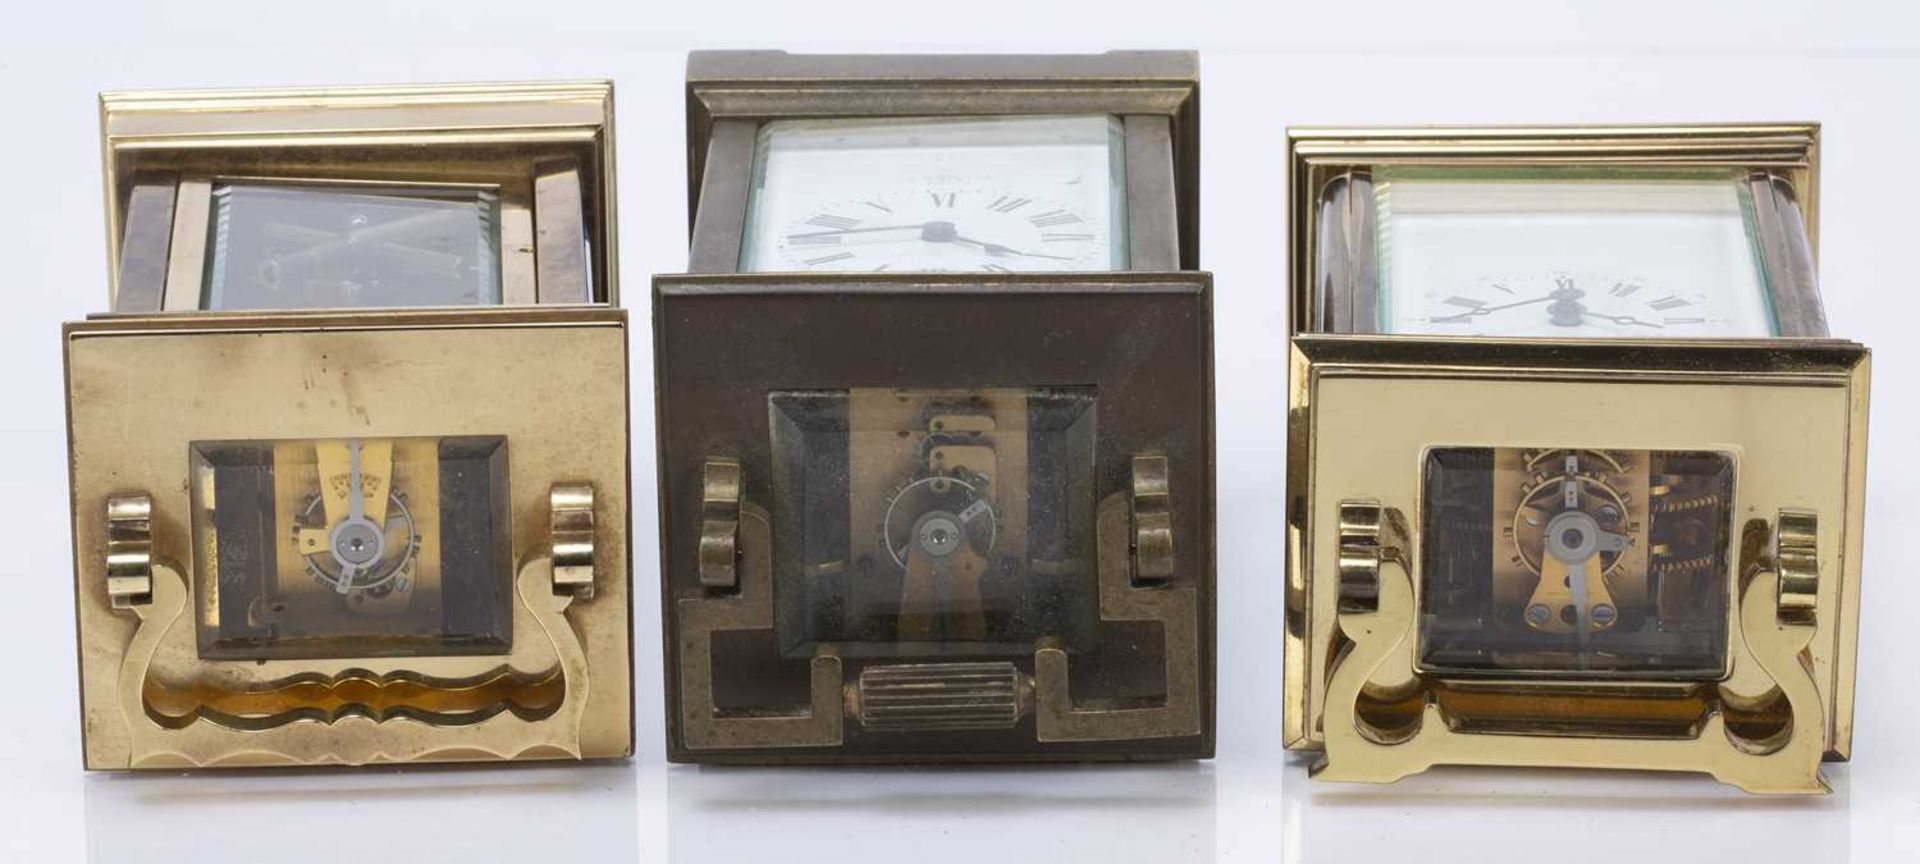 Three brass cased carriage clocks early/mid 20th Century, one made in France, with white enamel - Image 4 of 4